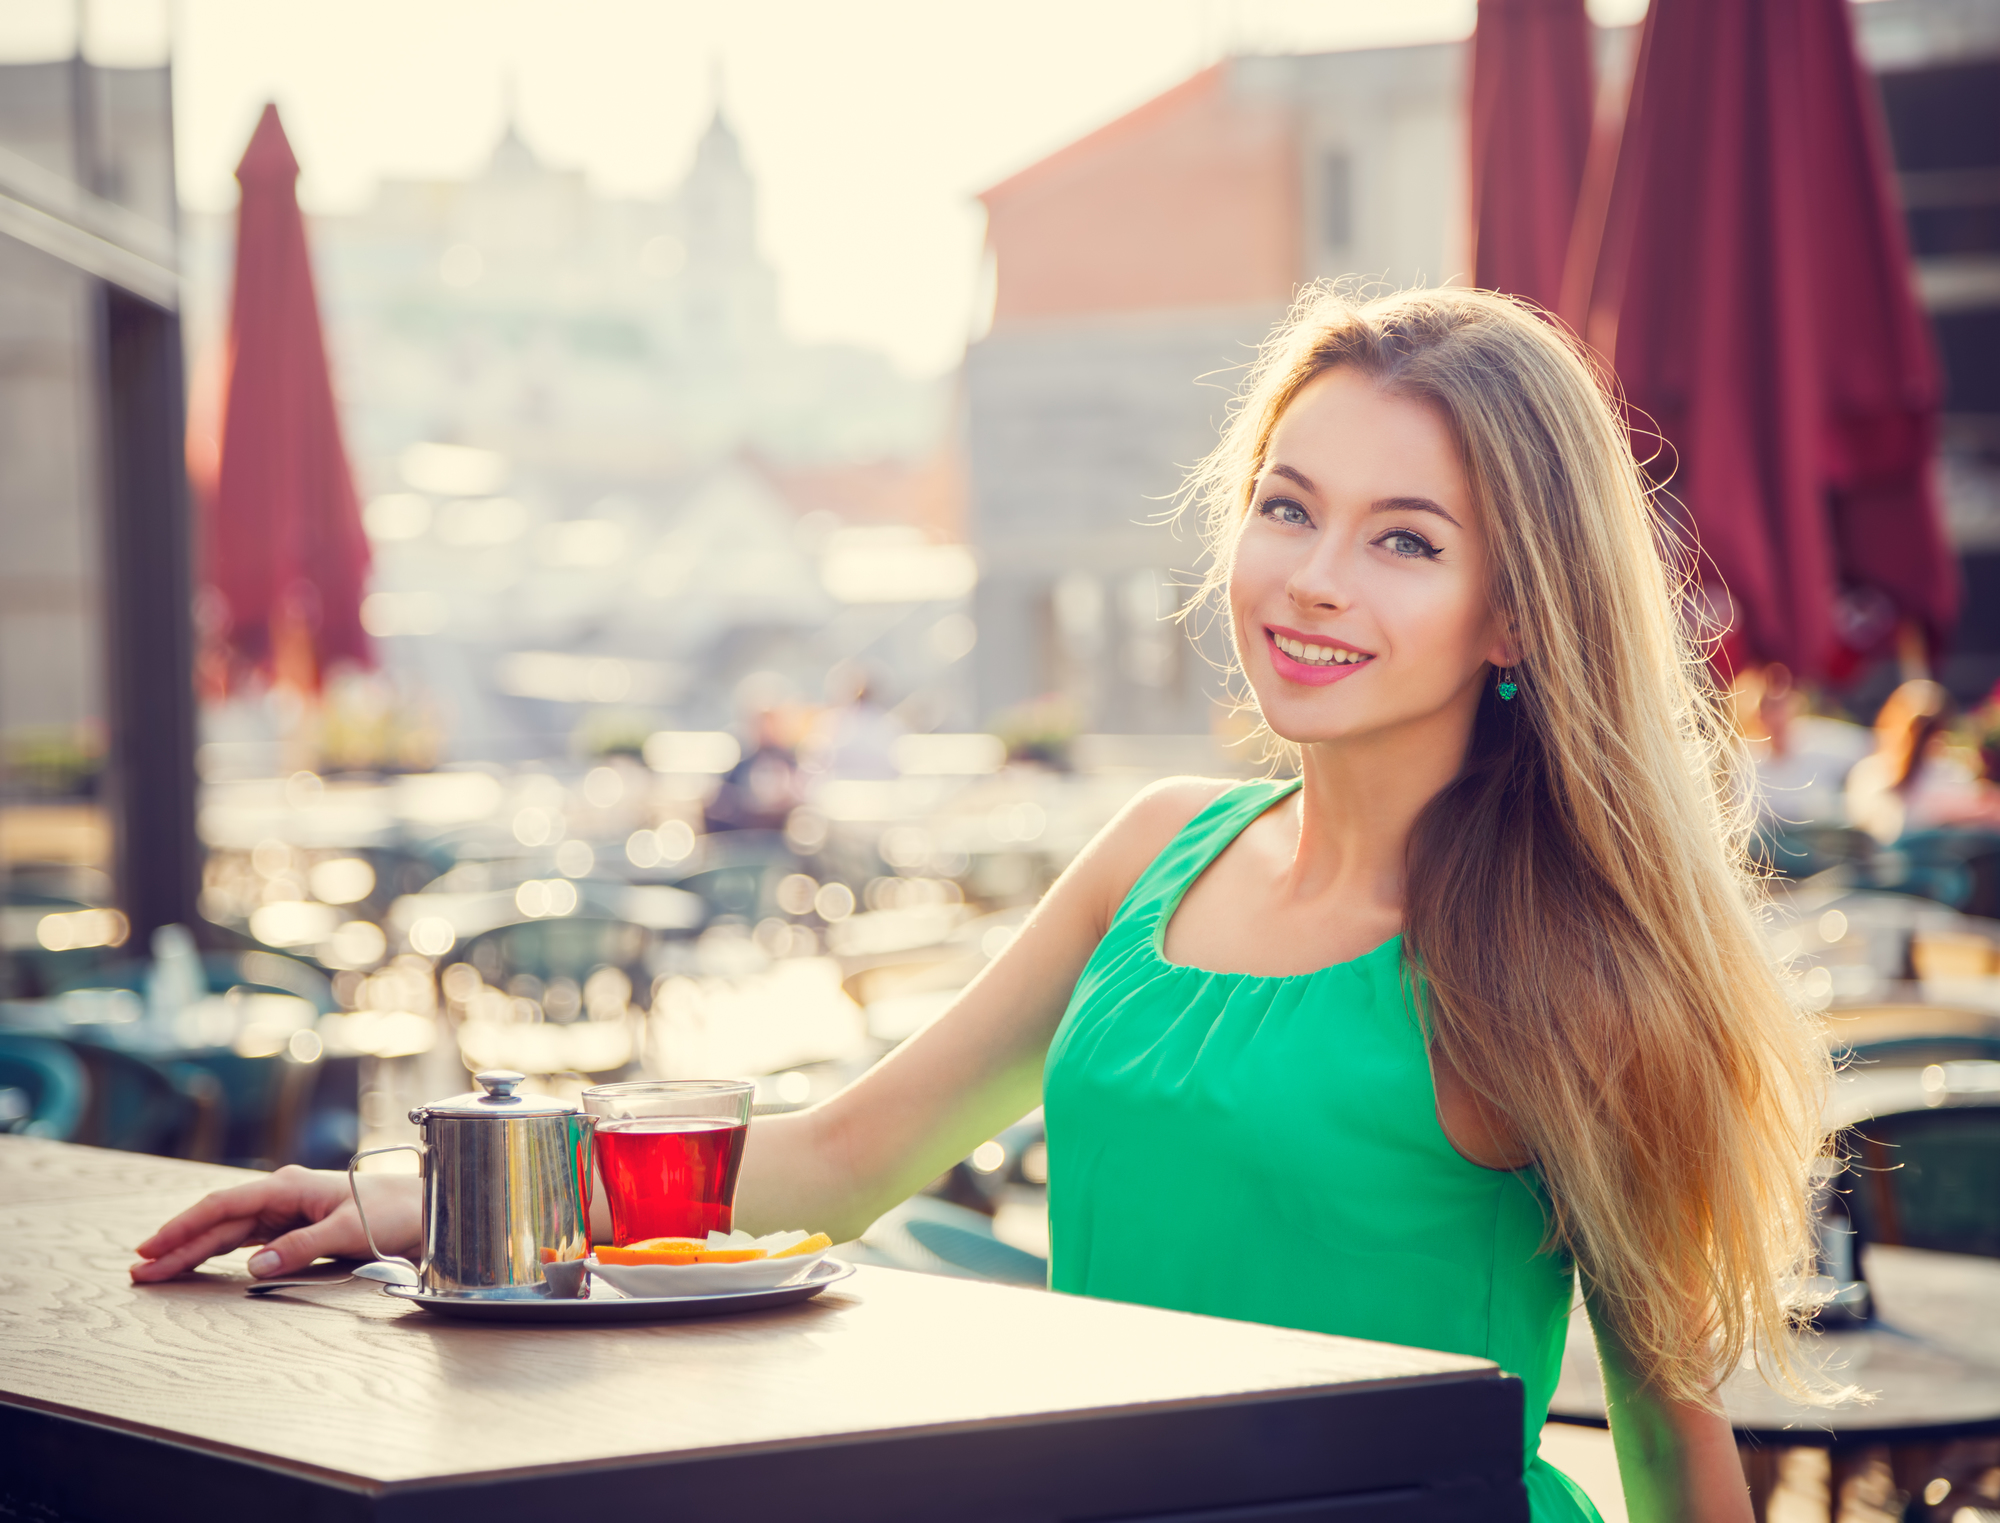 Young Woman Drinking Tea in a Cafe Outdoors. Summer City Background. Shallow Depth of Field. Toned Photo.